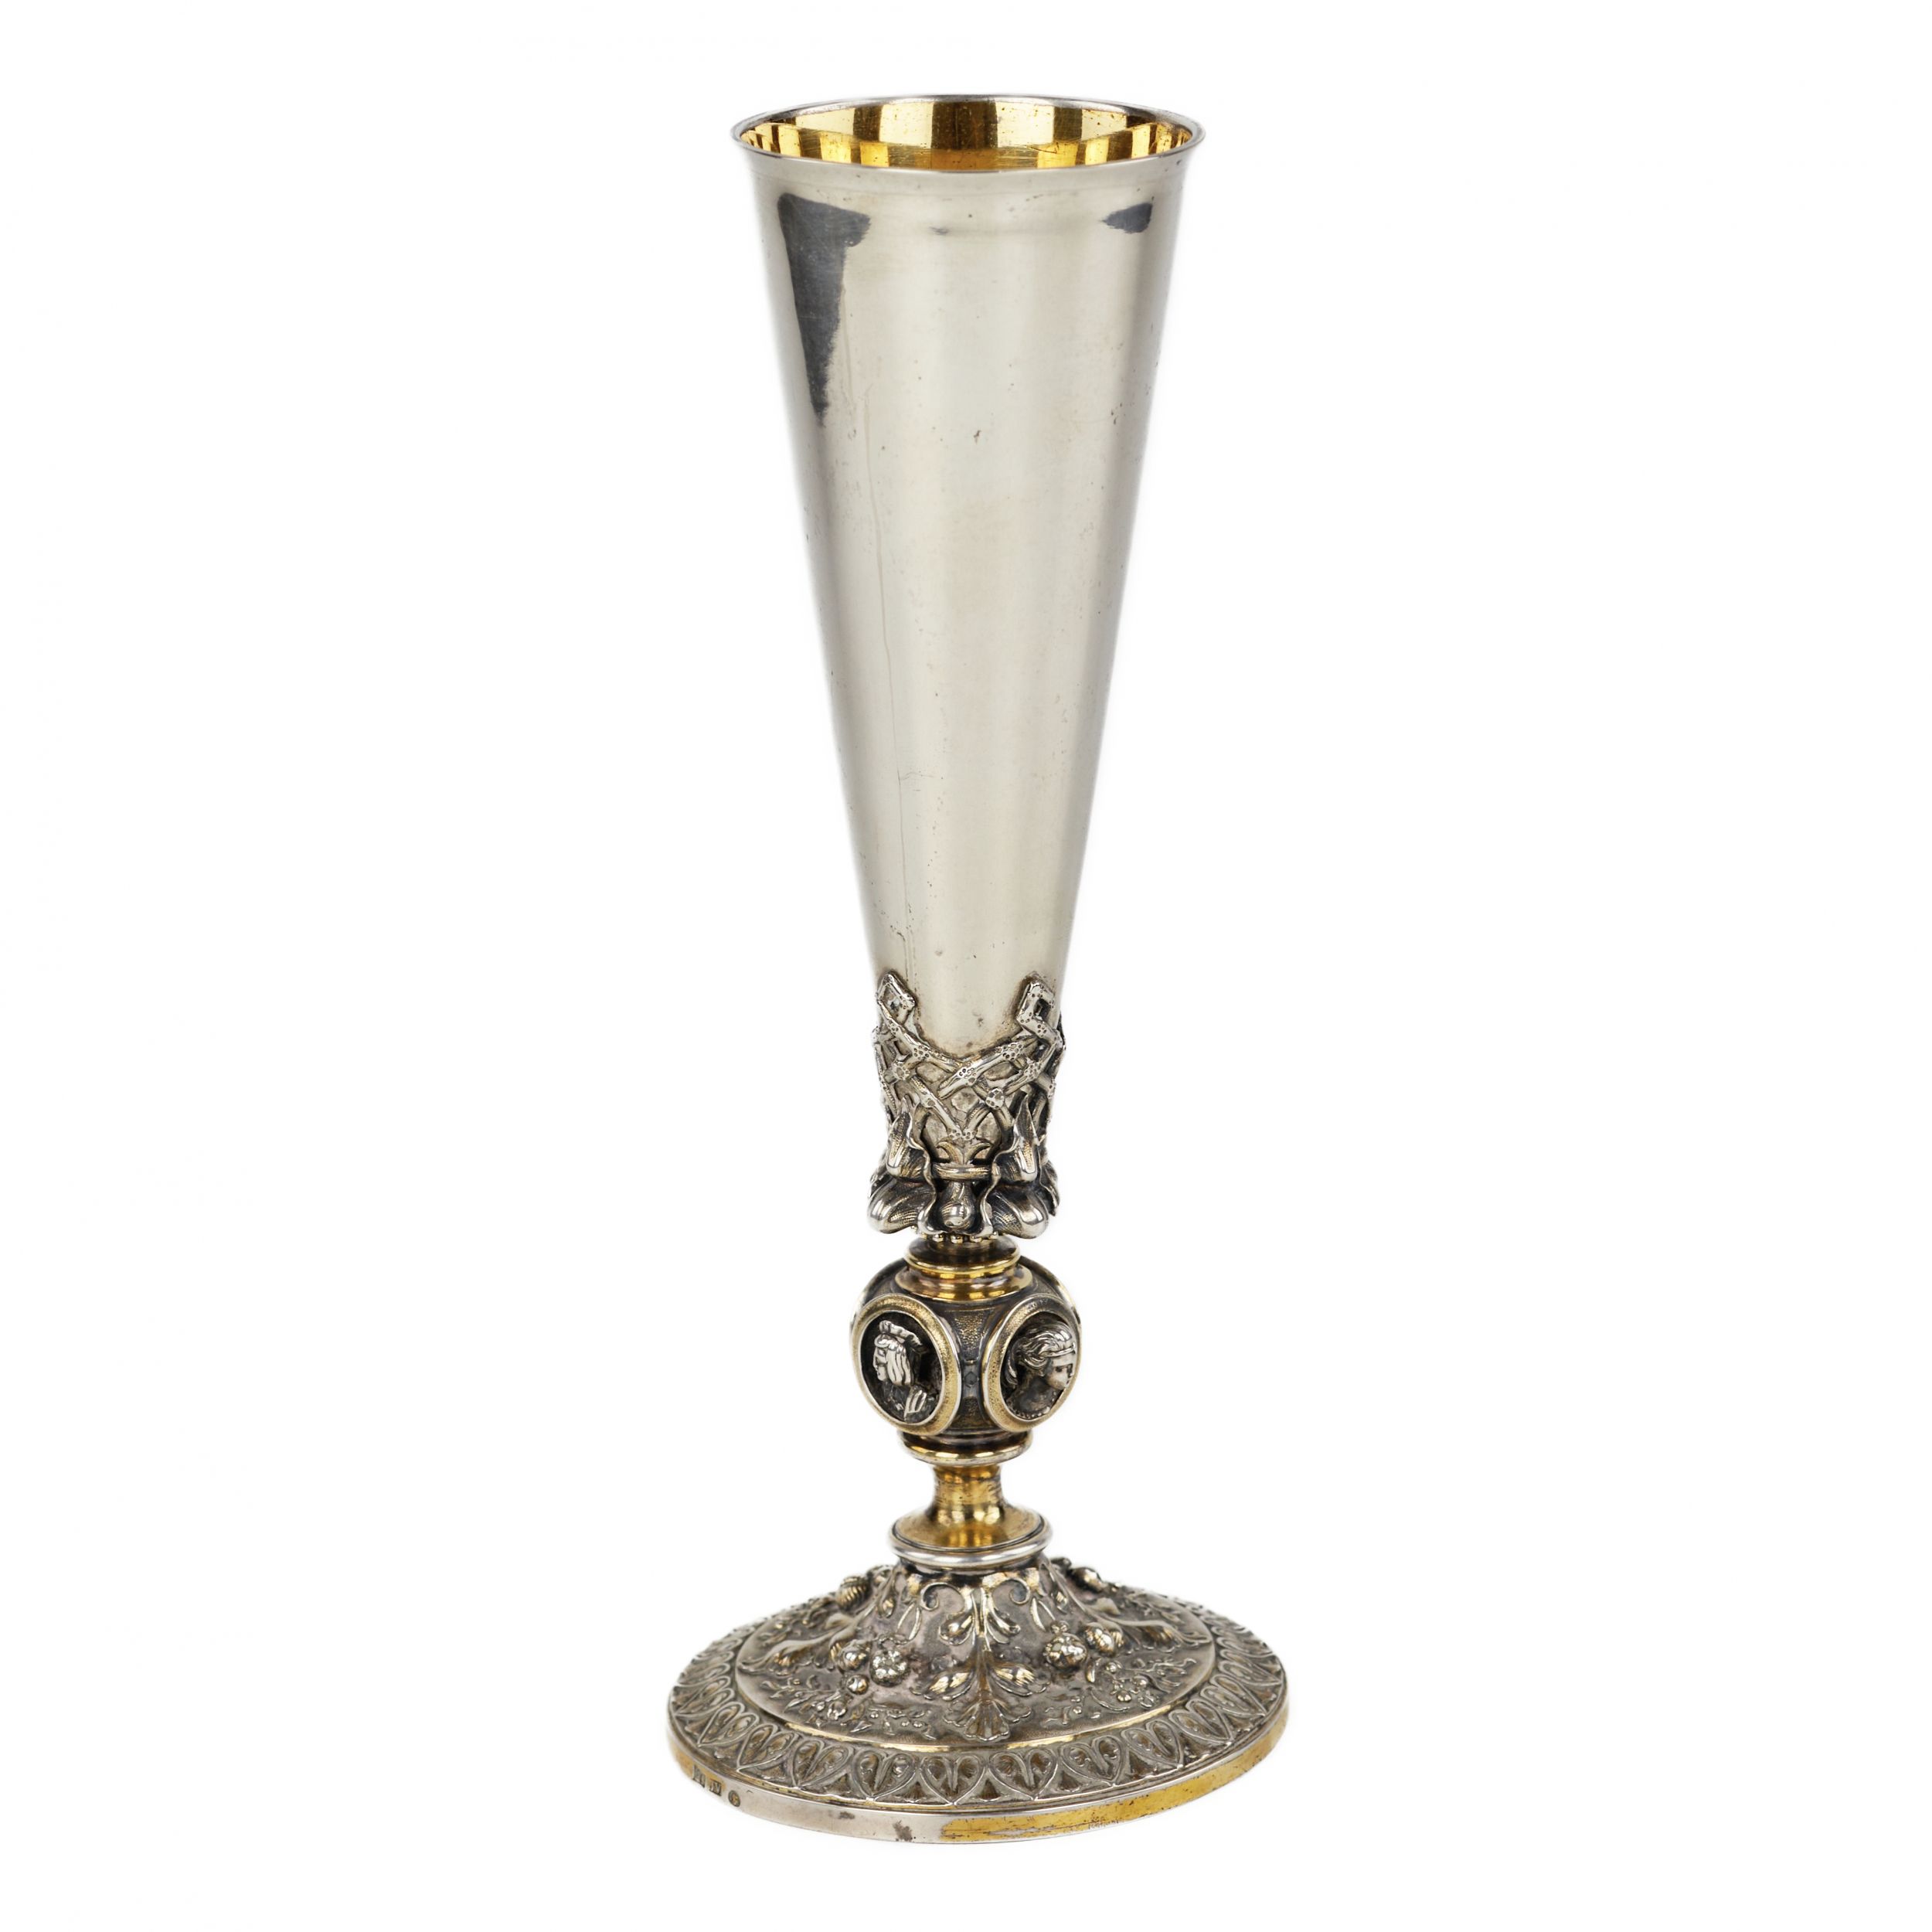 Gilded-silver-goblet-St-Petersburg-84-samples-late-19th-century-